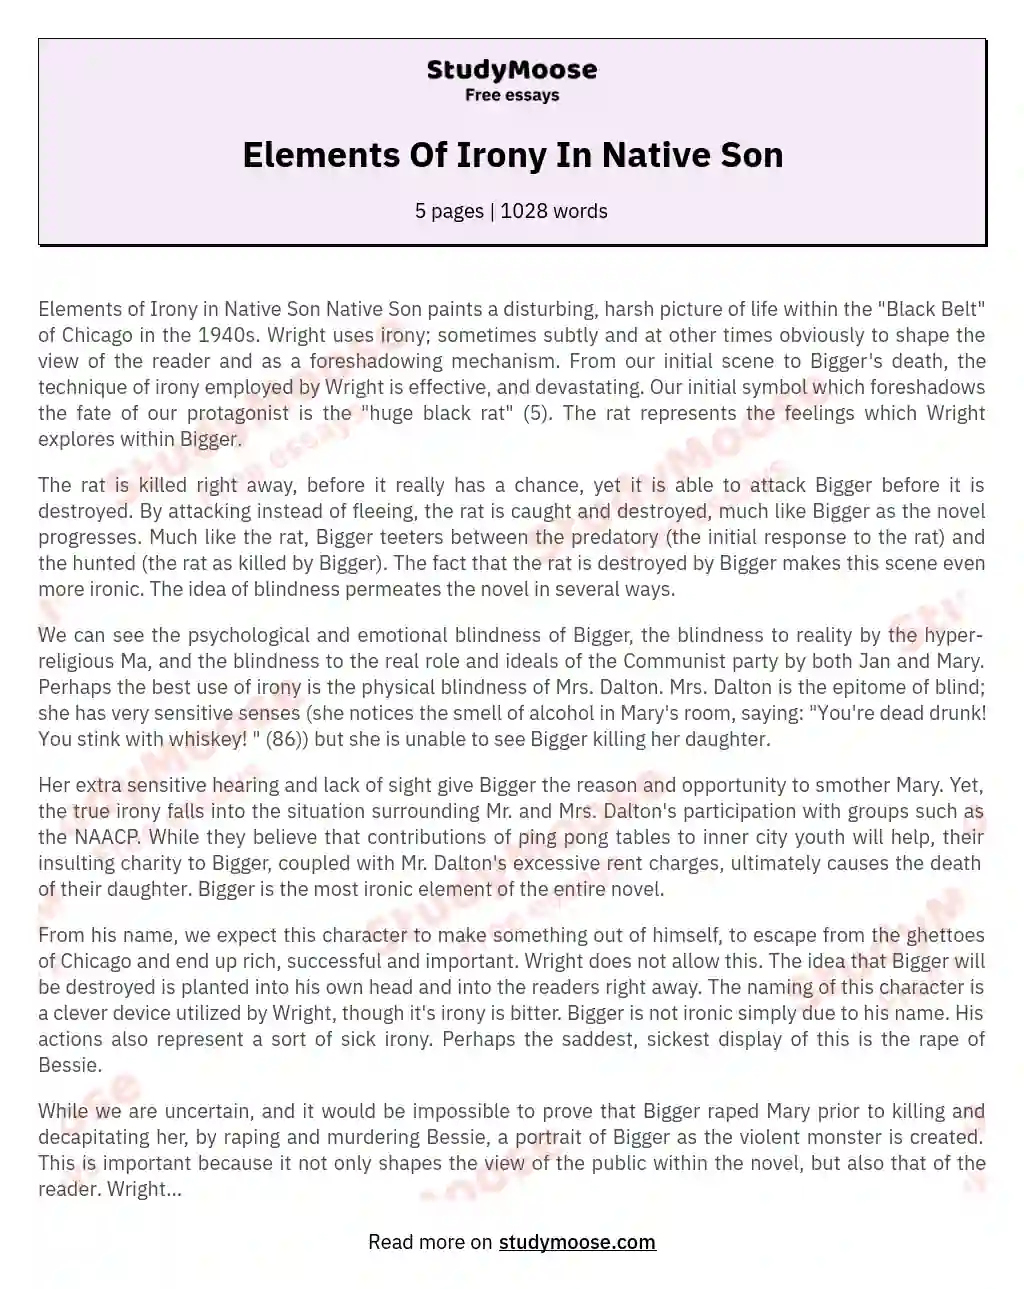 Elements Of Irony In Native Son